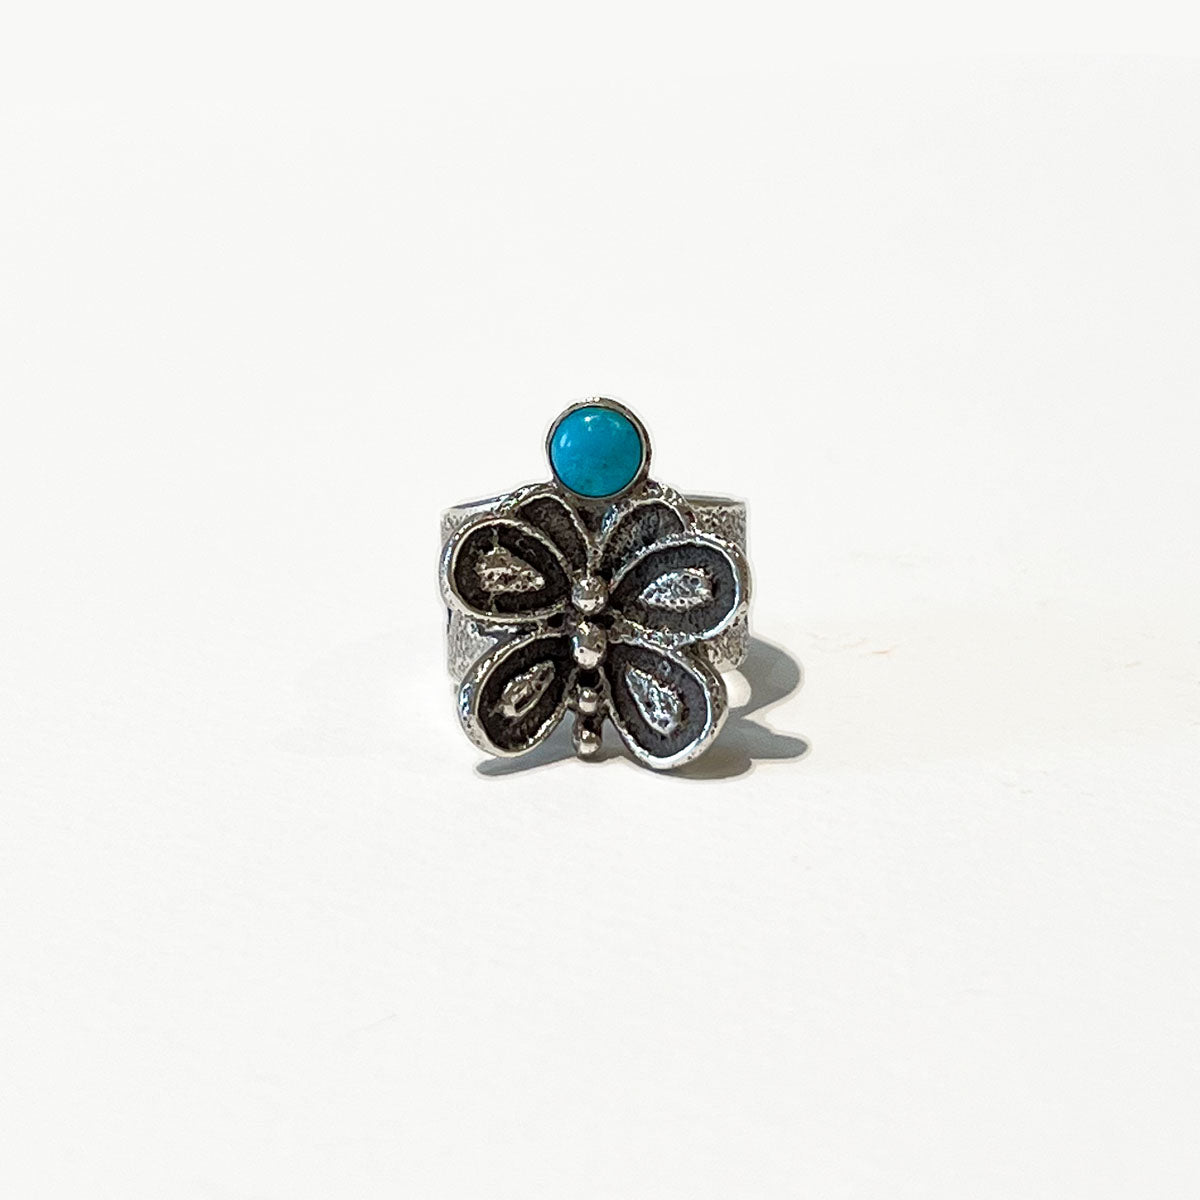 Cordell Pajarito Turquoise Butterfly Ring